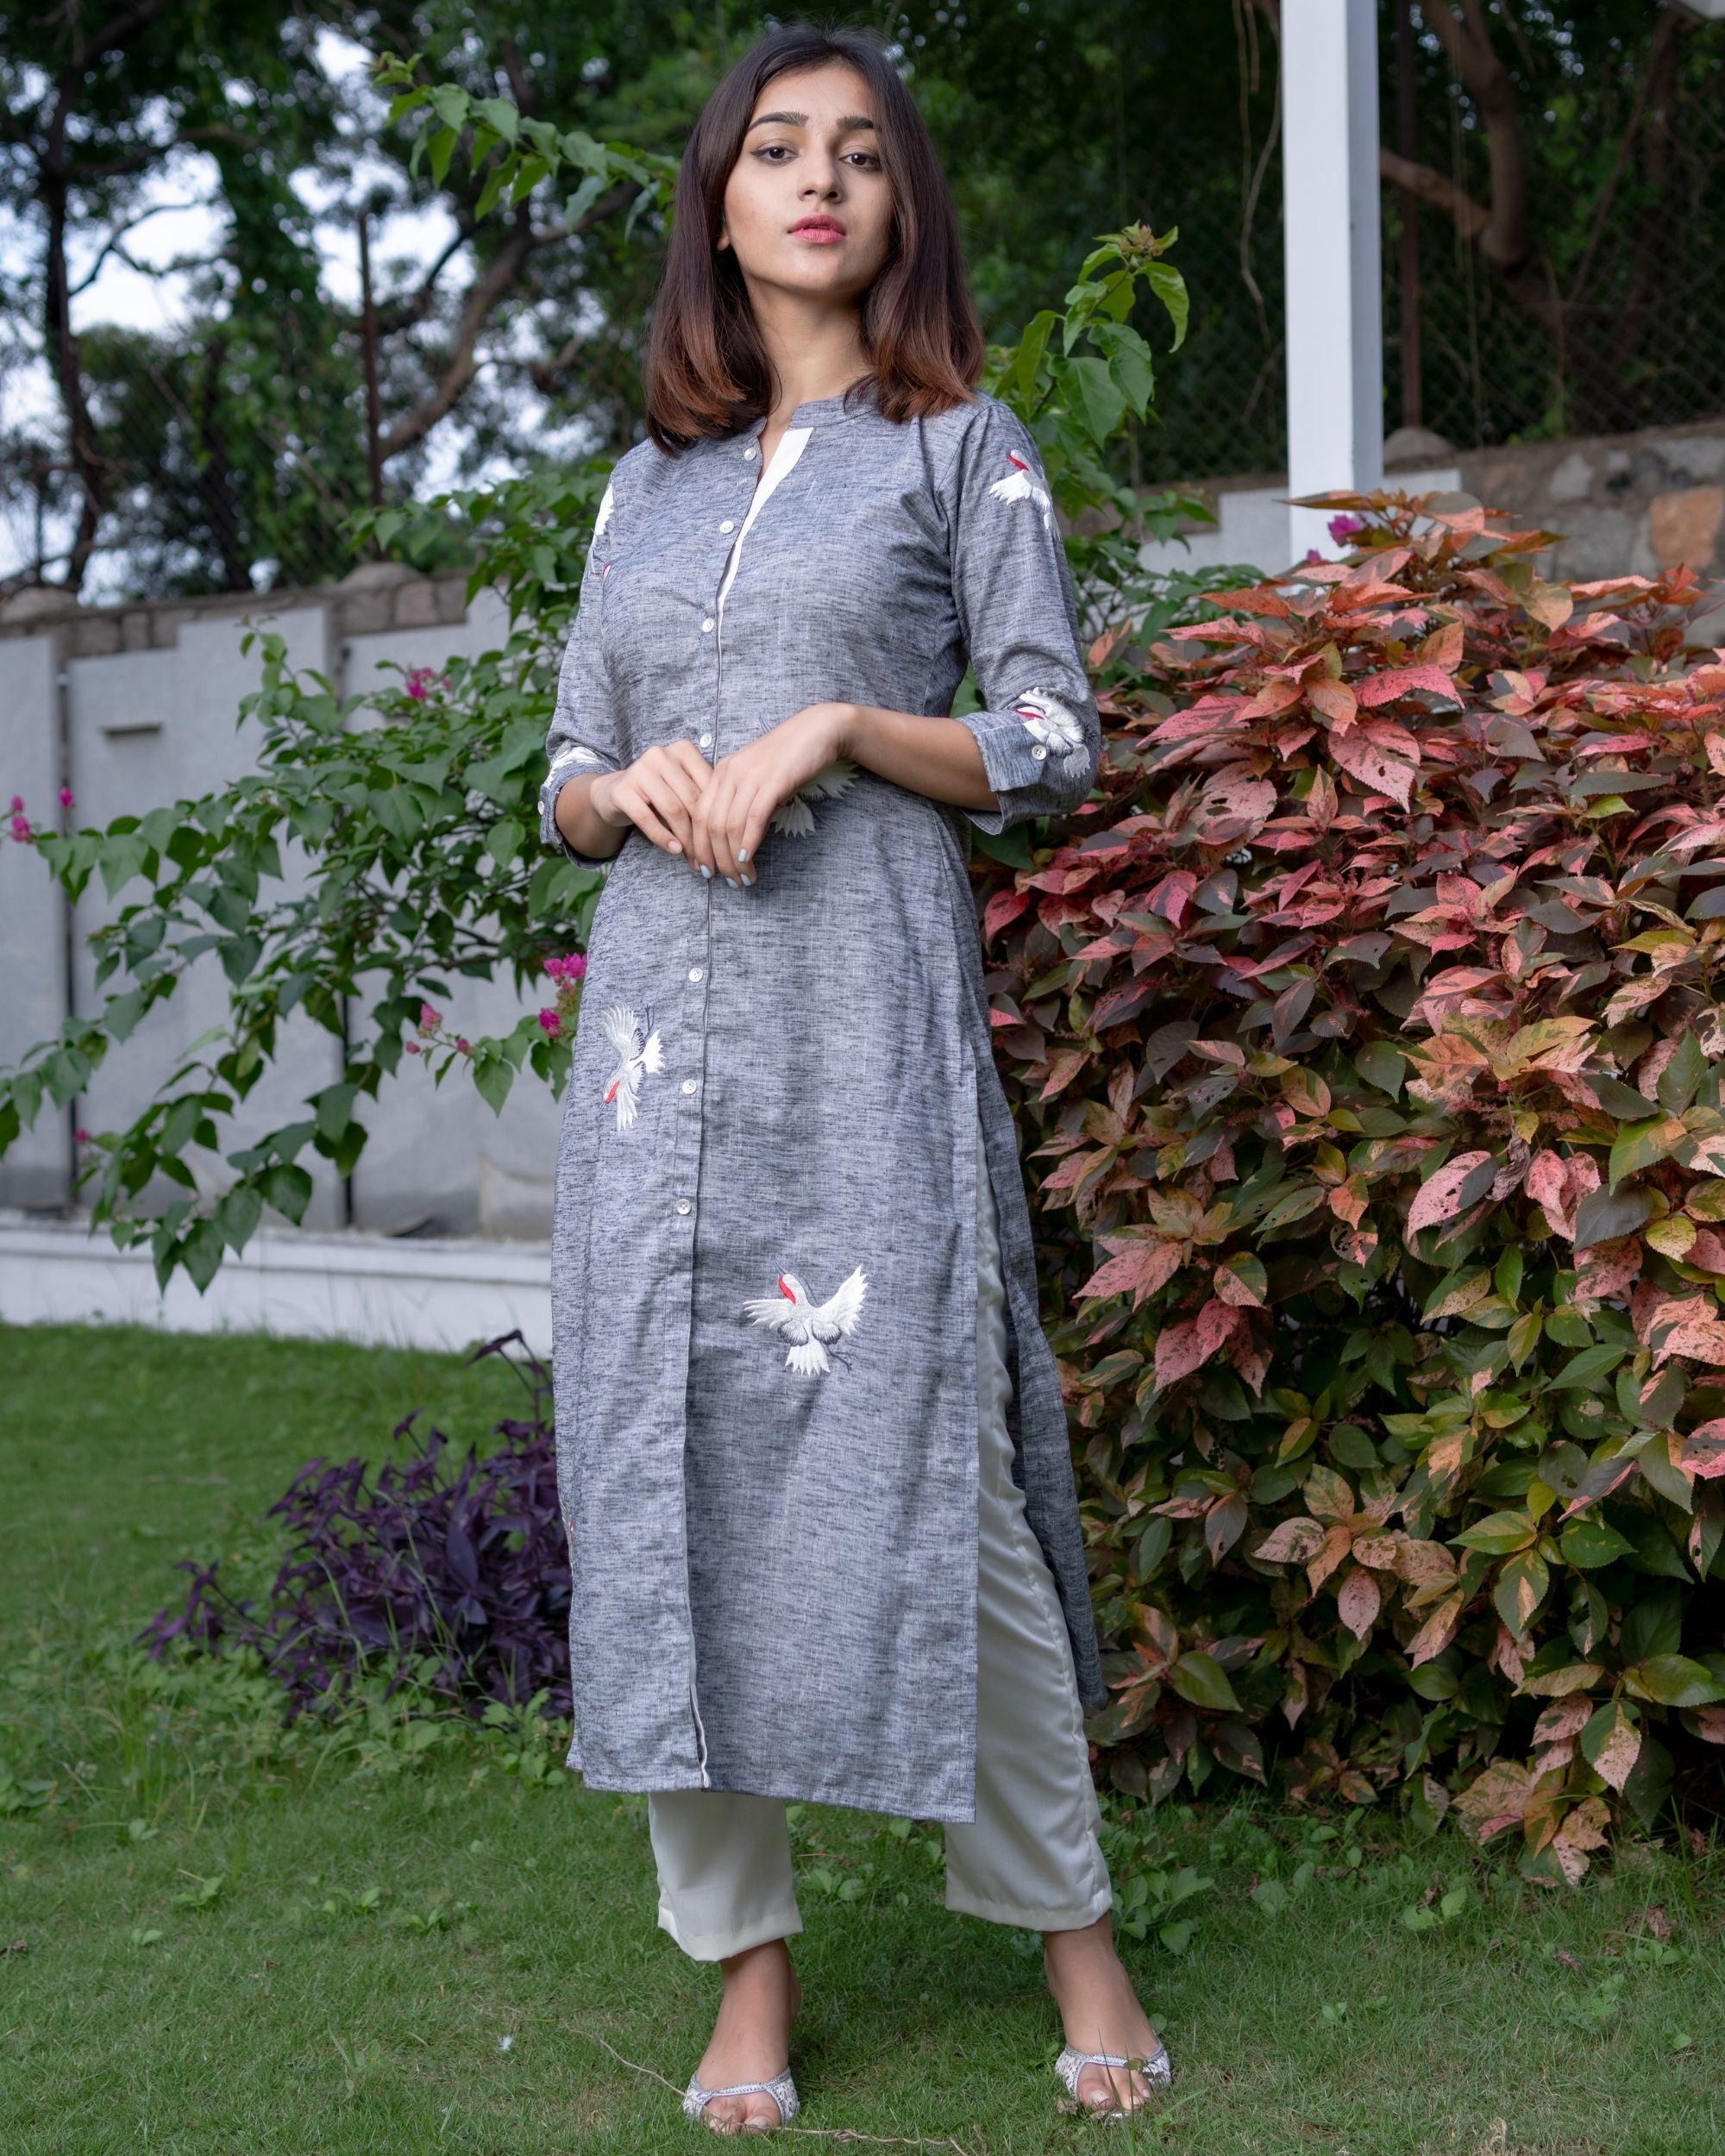 Grey floral printed kurta with pants - set of two by Desi Doree